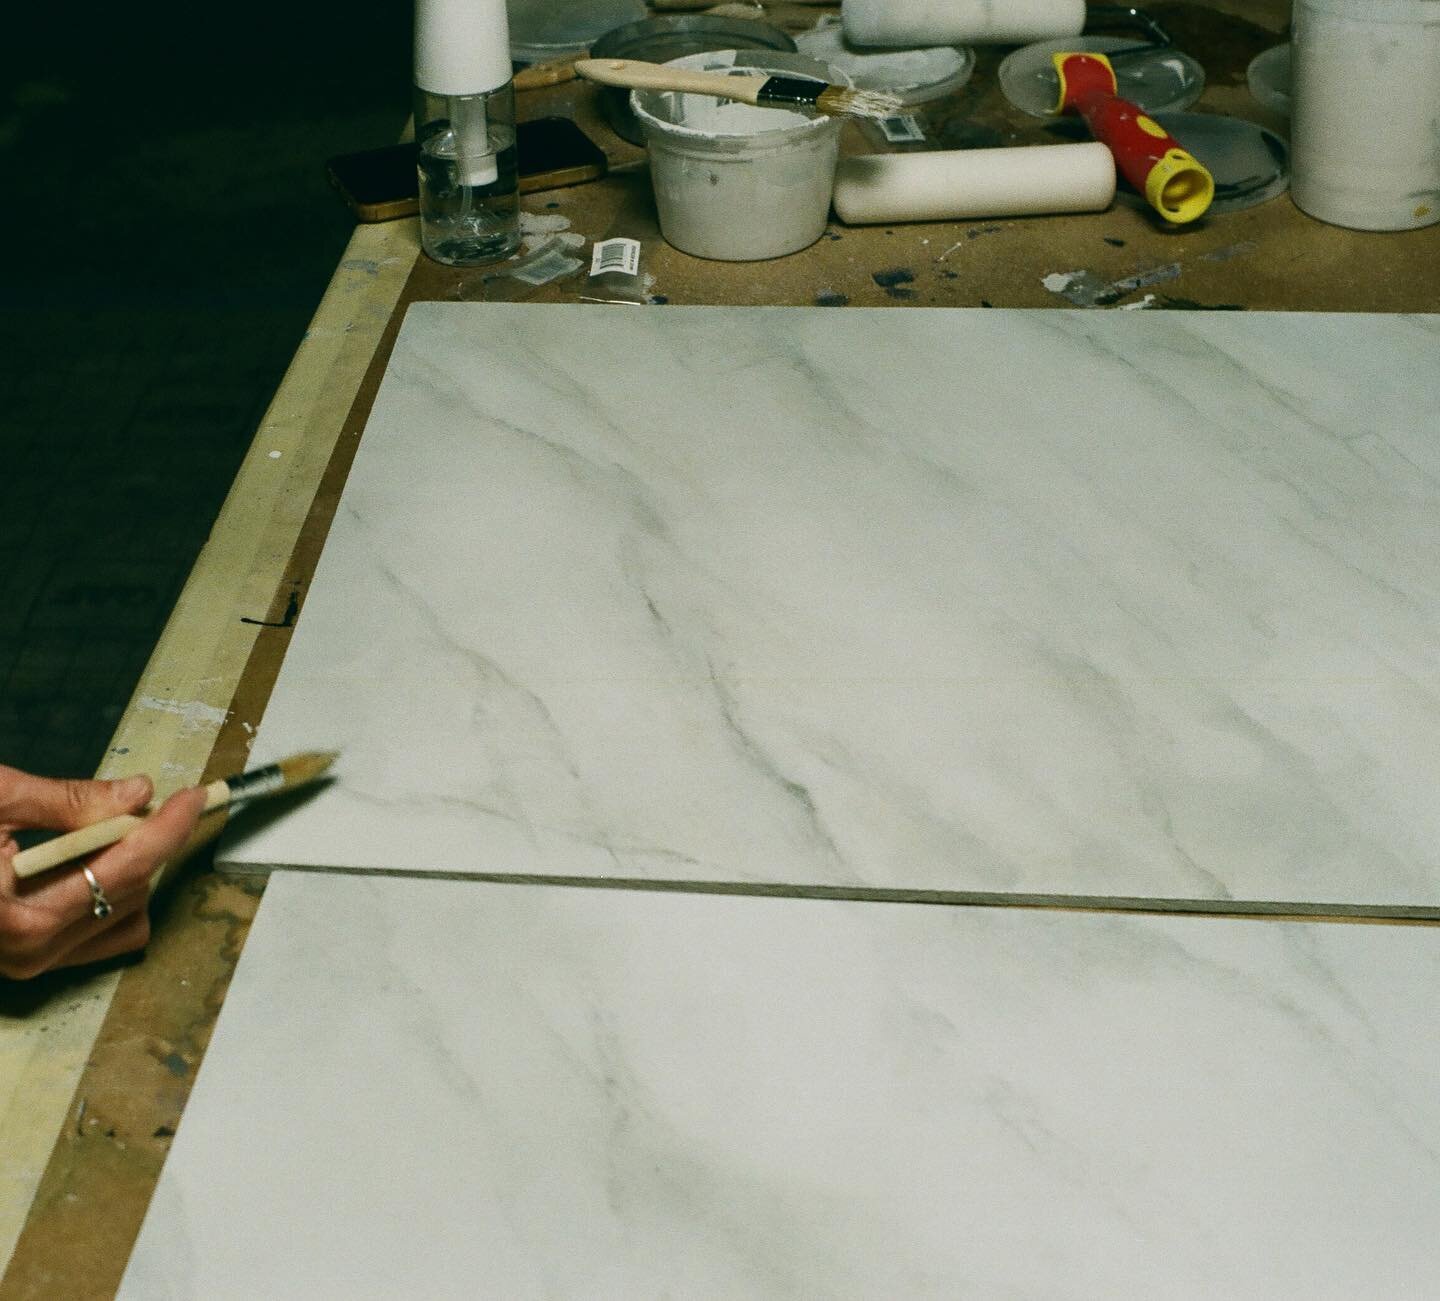 Hannah hard at work 🌫🌫🌫
.
.
.
.
.
.
#art #scenic #scenicartists #paint #marble #samples #film #entertainment #tv